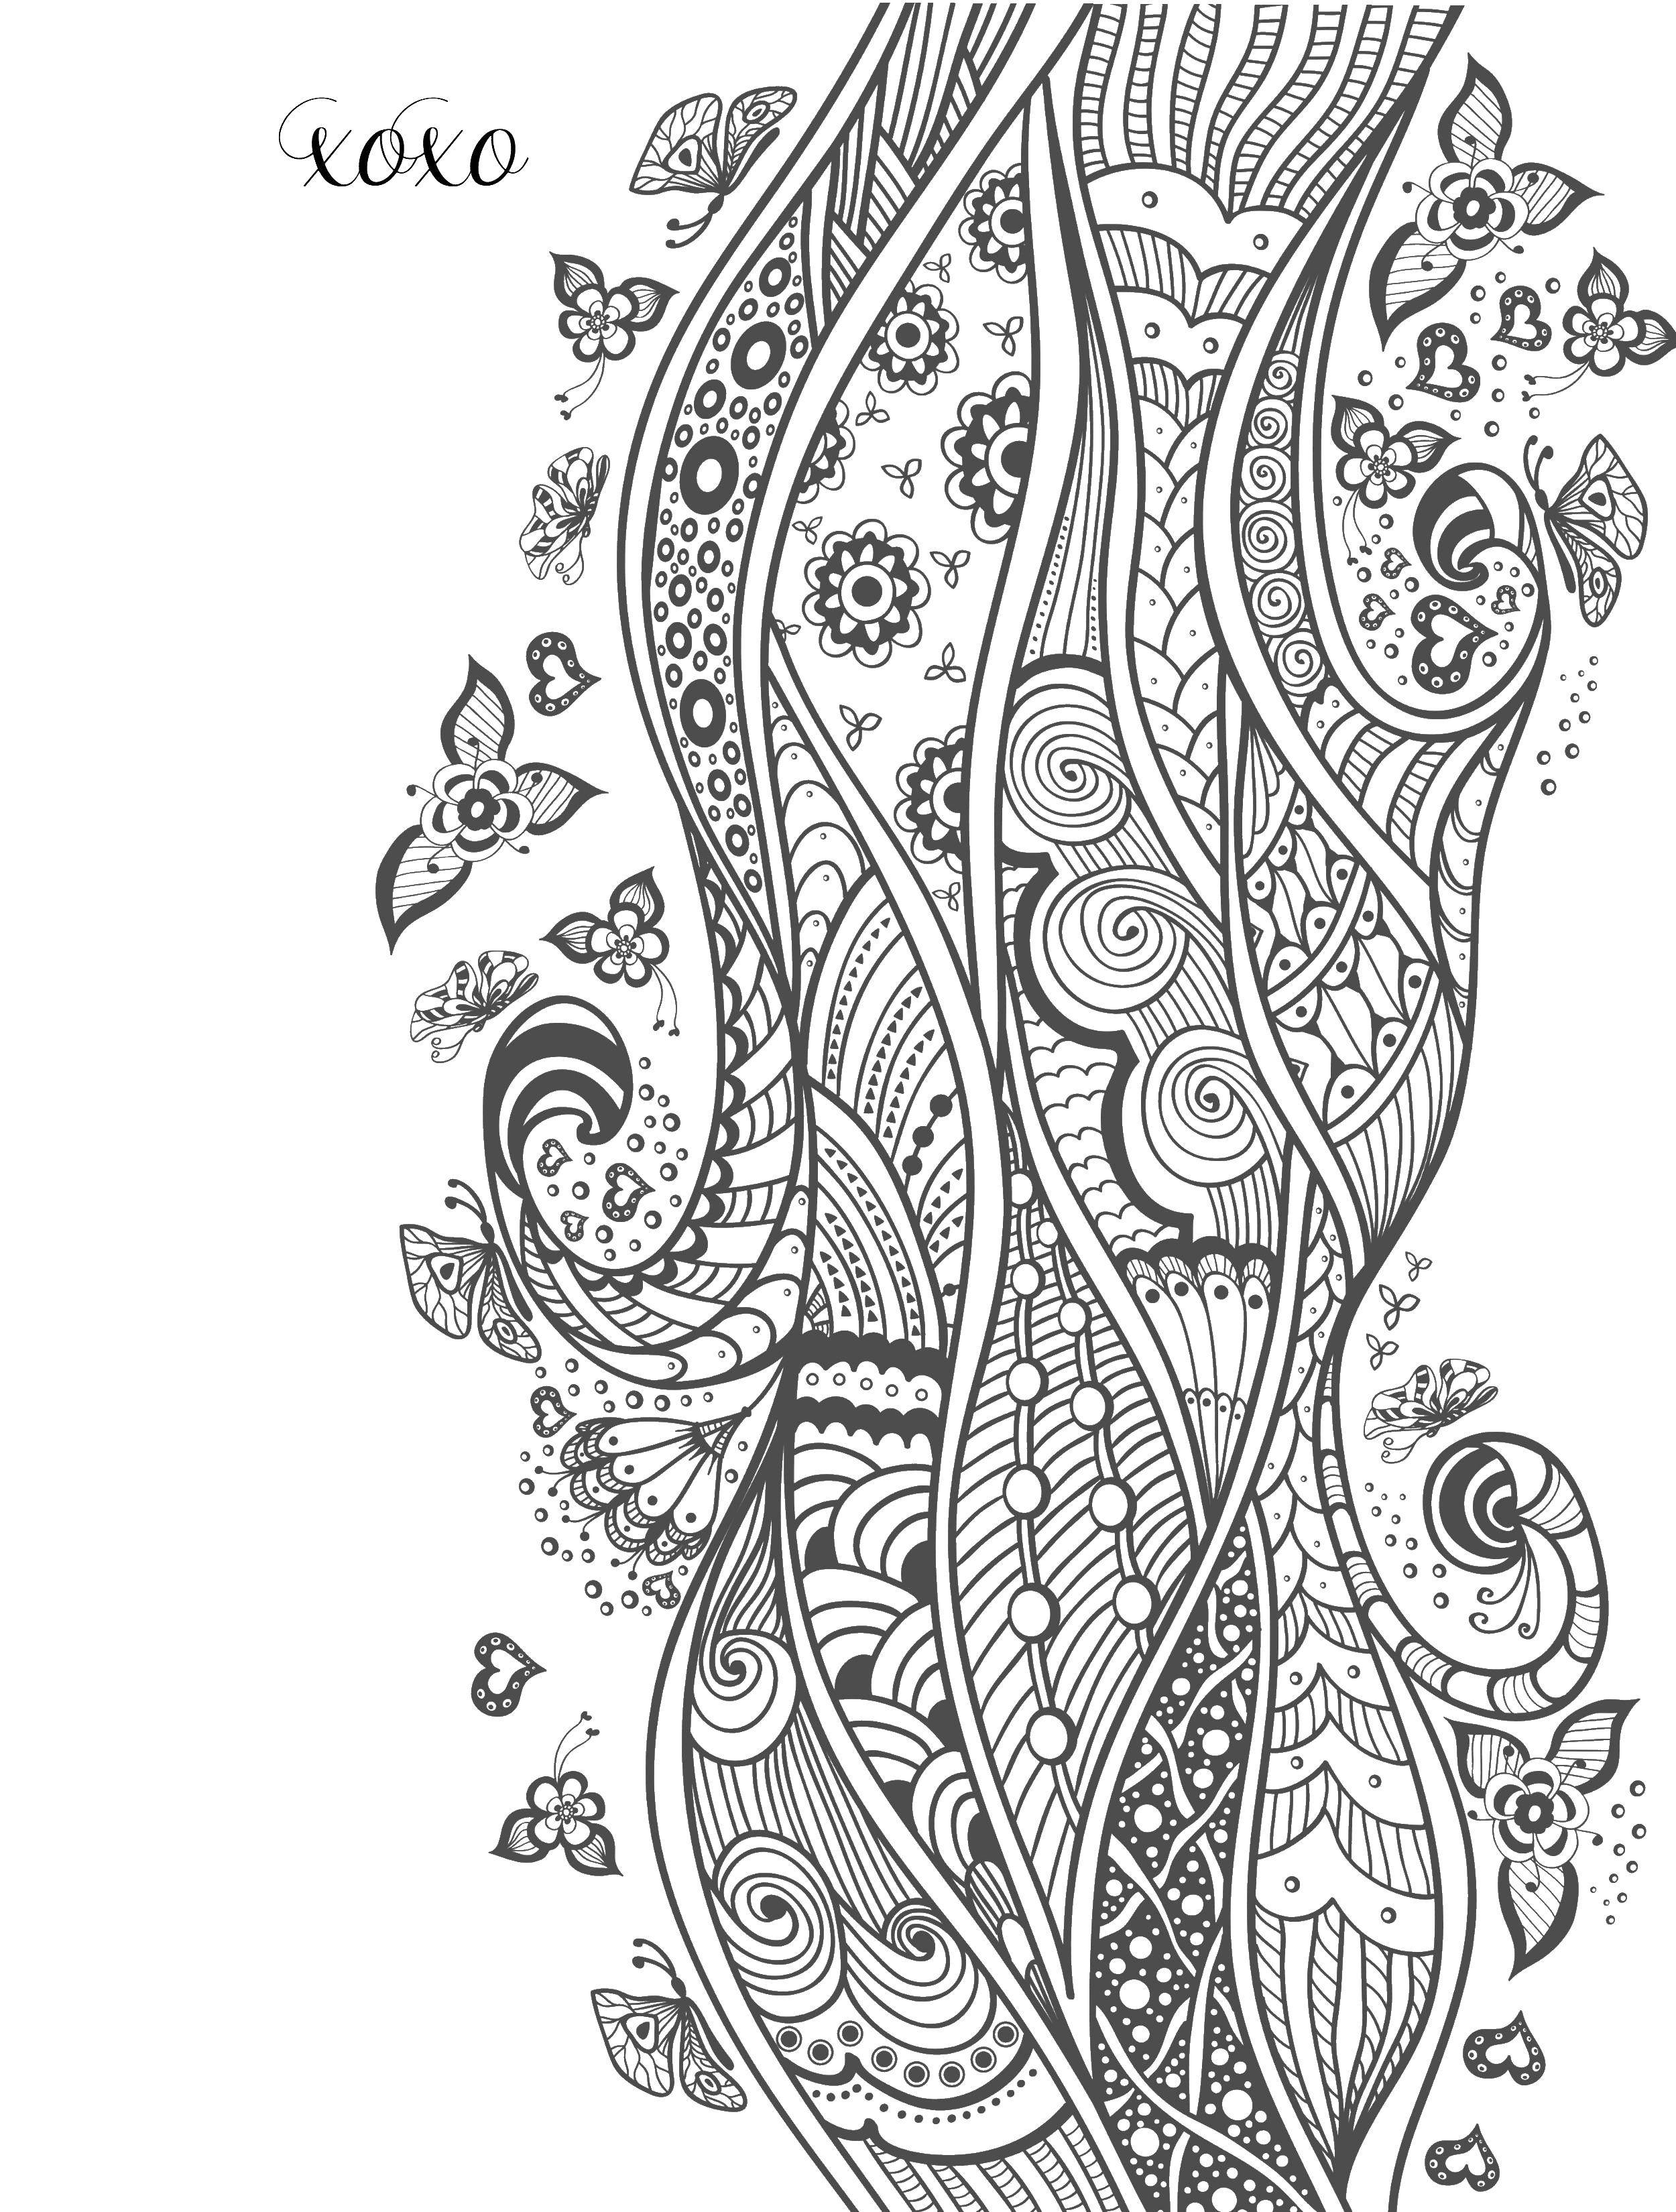 Coloring Flower patterns. Category flowers. Tags:  patterns, flowers.